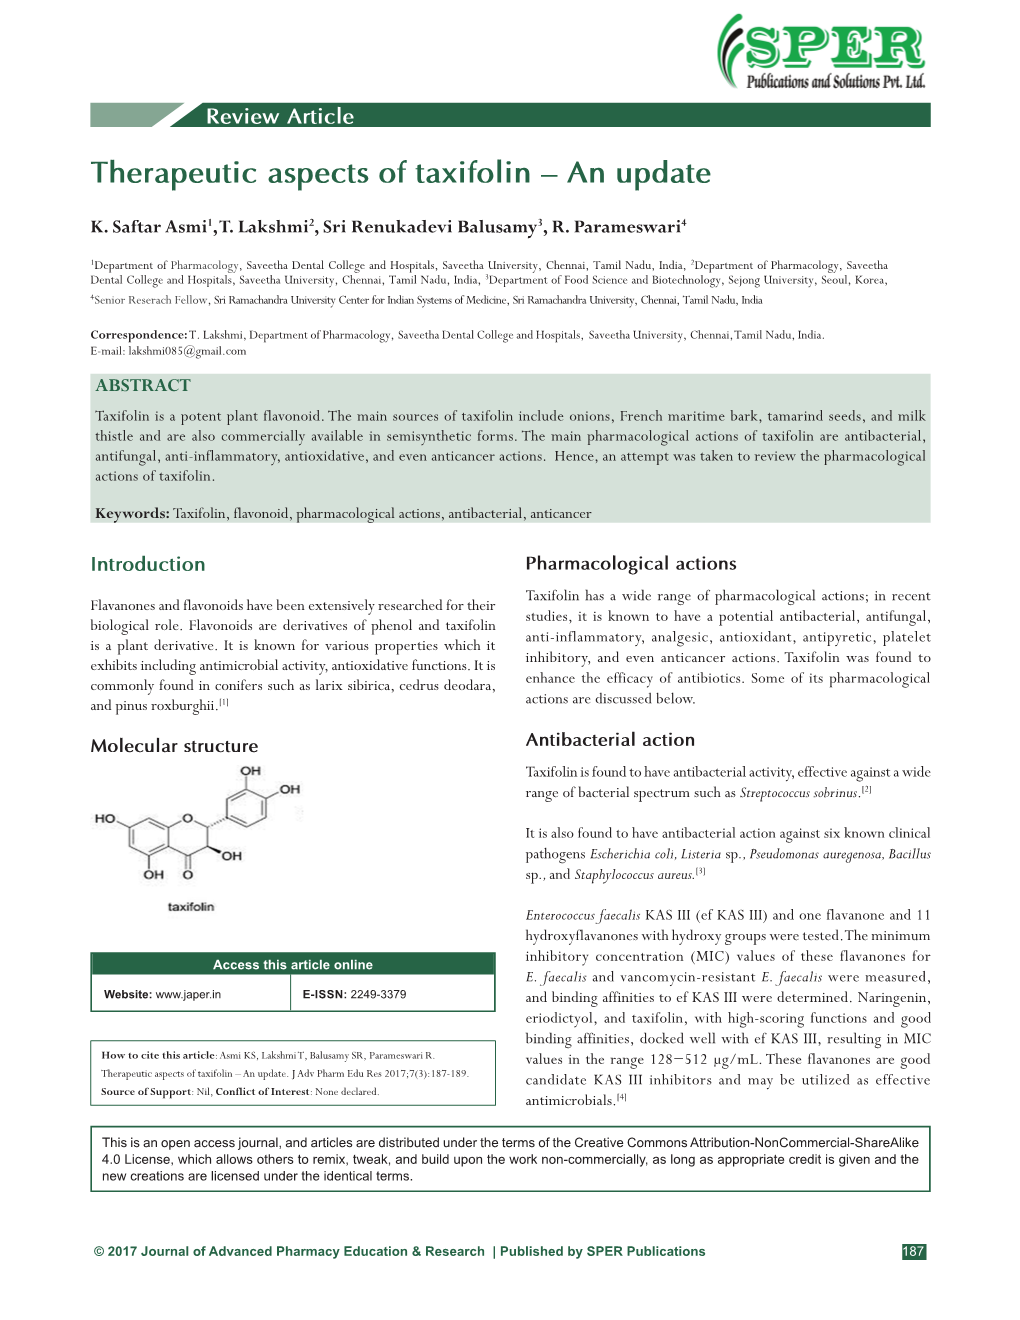 Therapeutic Aspects of Taxifolin – an Update